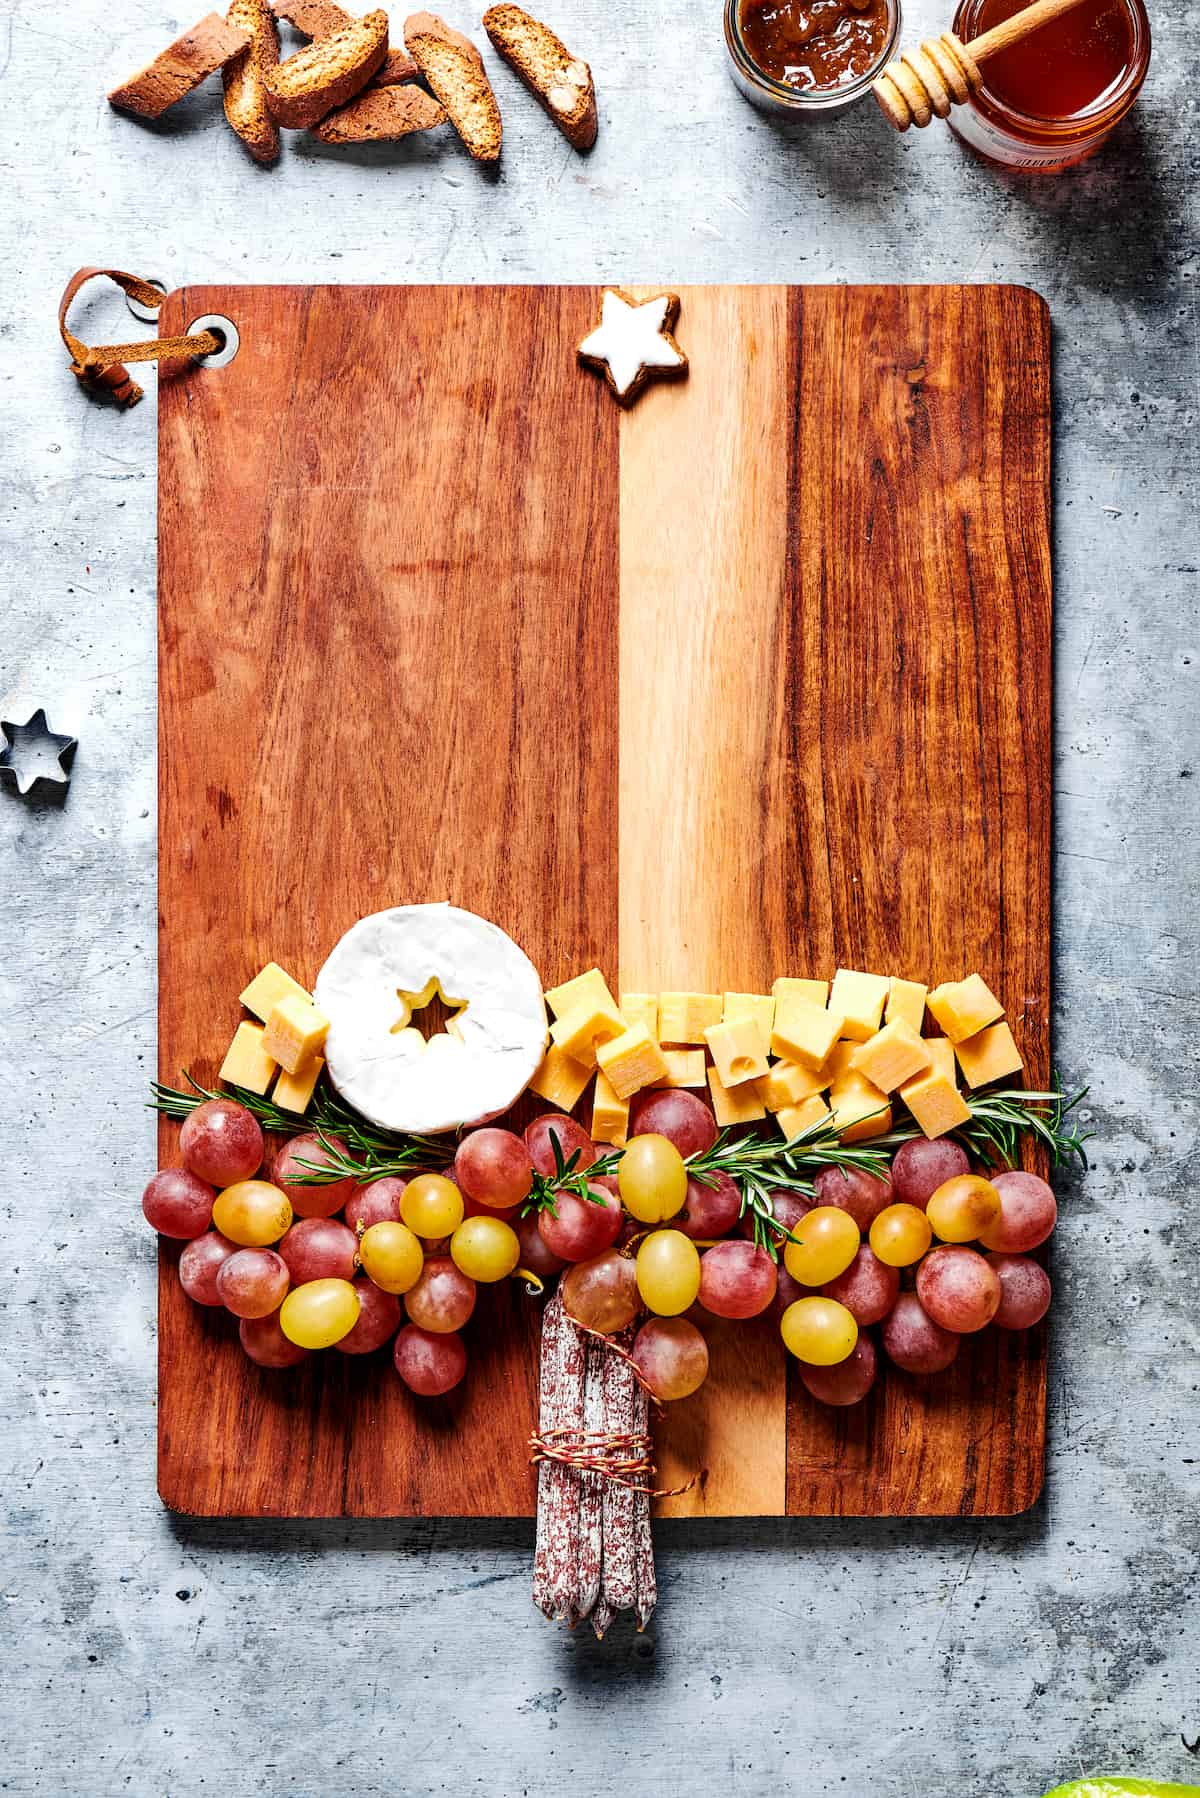 Grapes, rosemary, and chunks of cheese on a cutting board